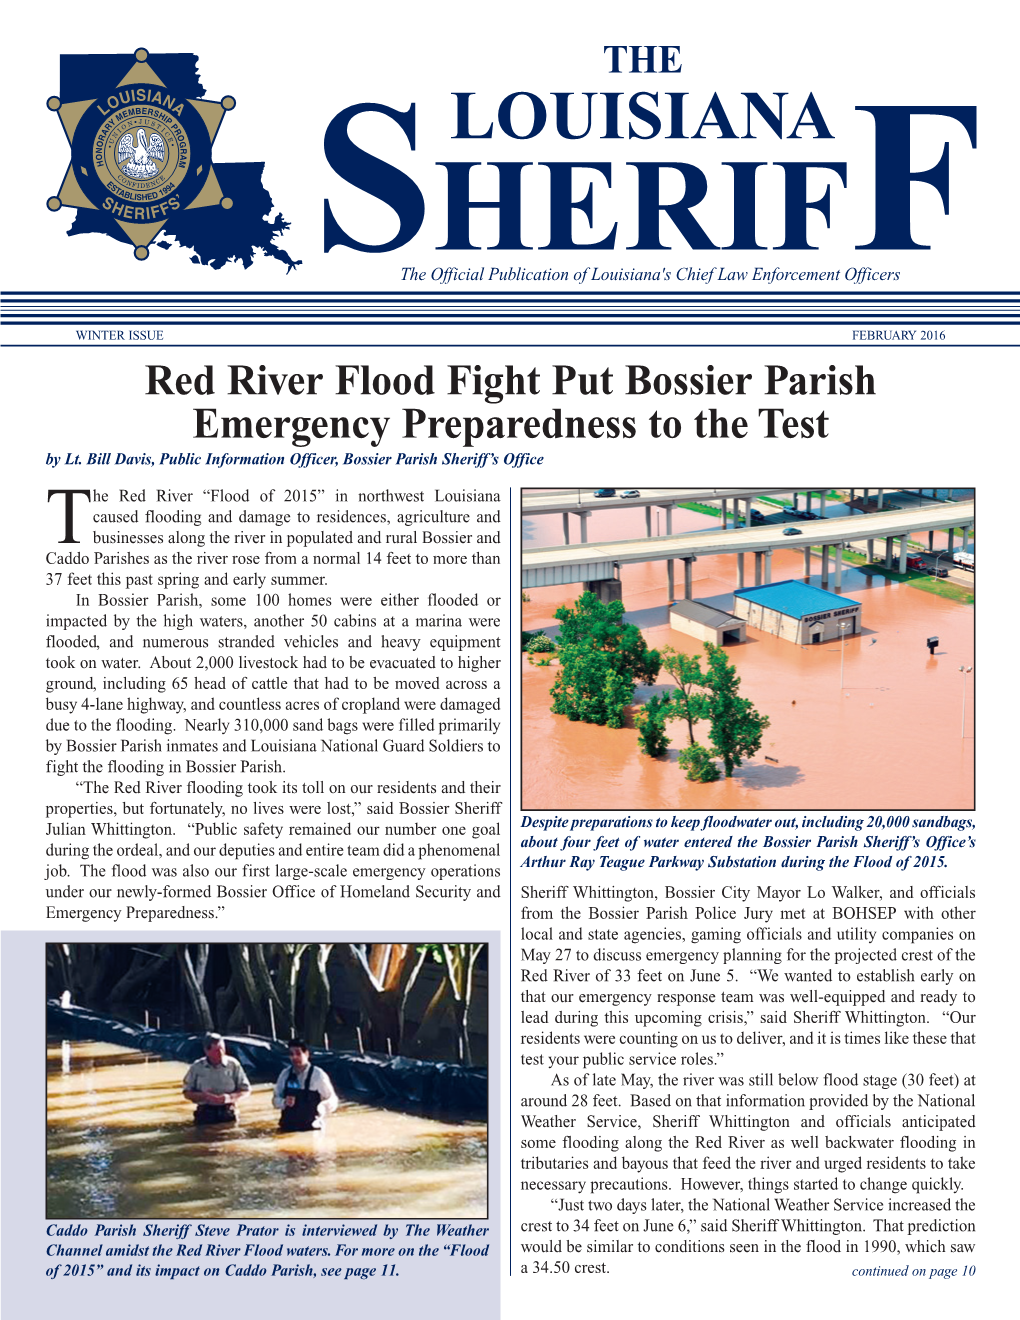 Red River Flood Fight Put Bossier Parish Emergency Preparedness to the Test by Lt